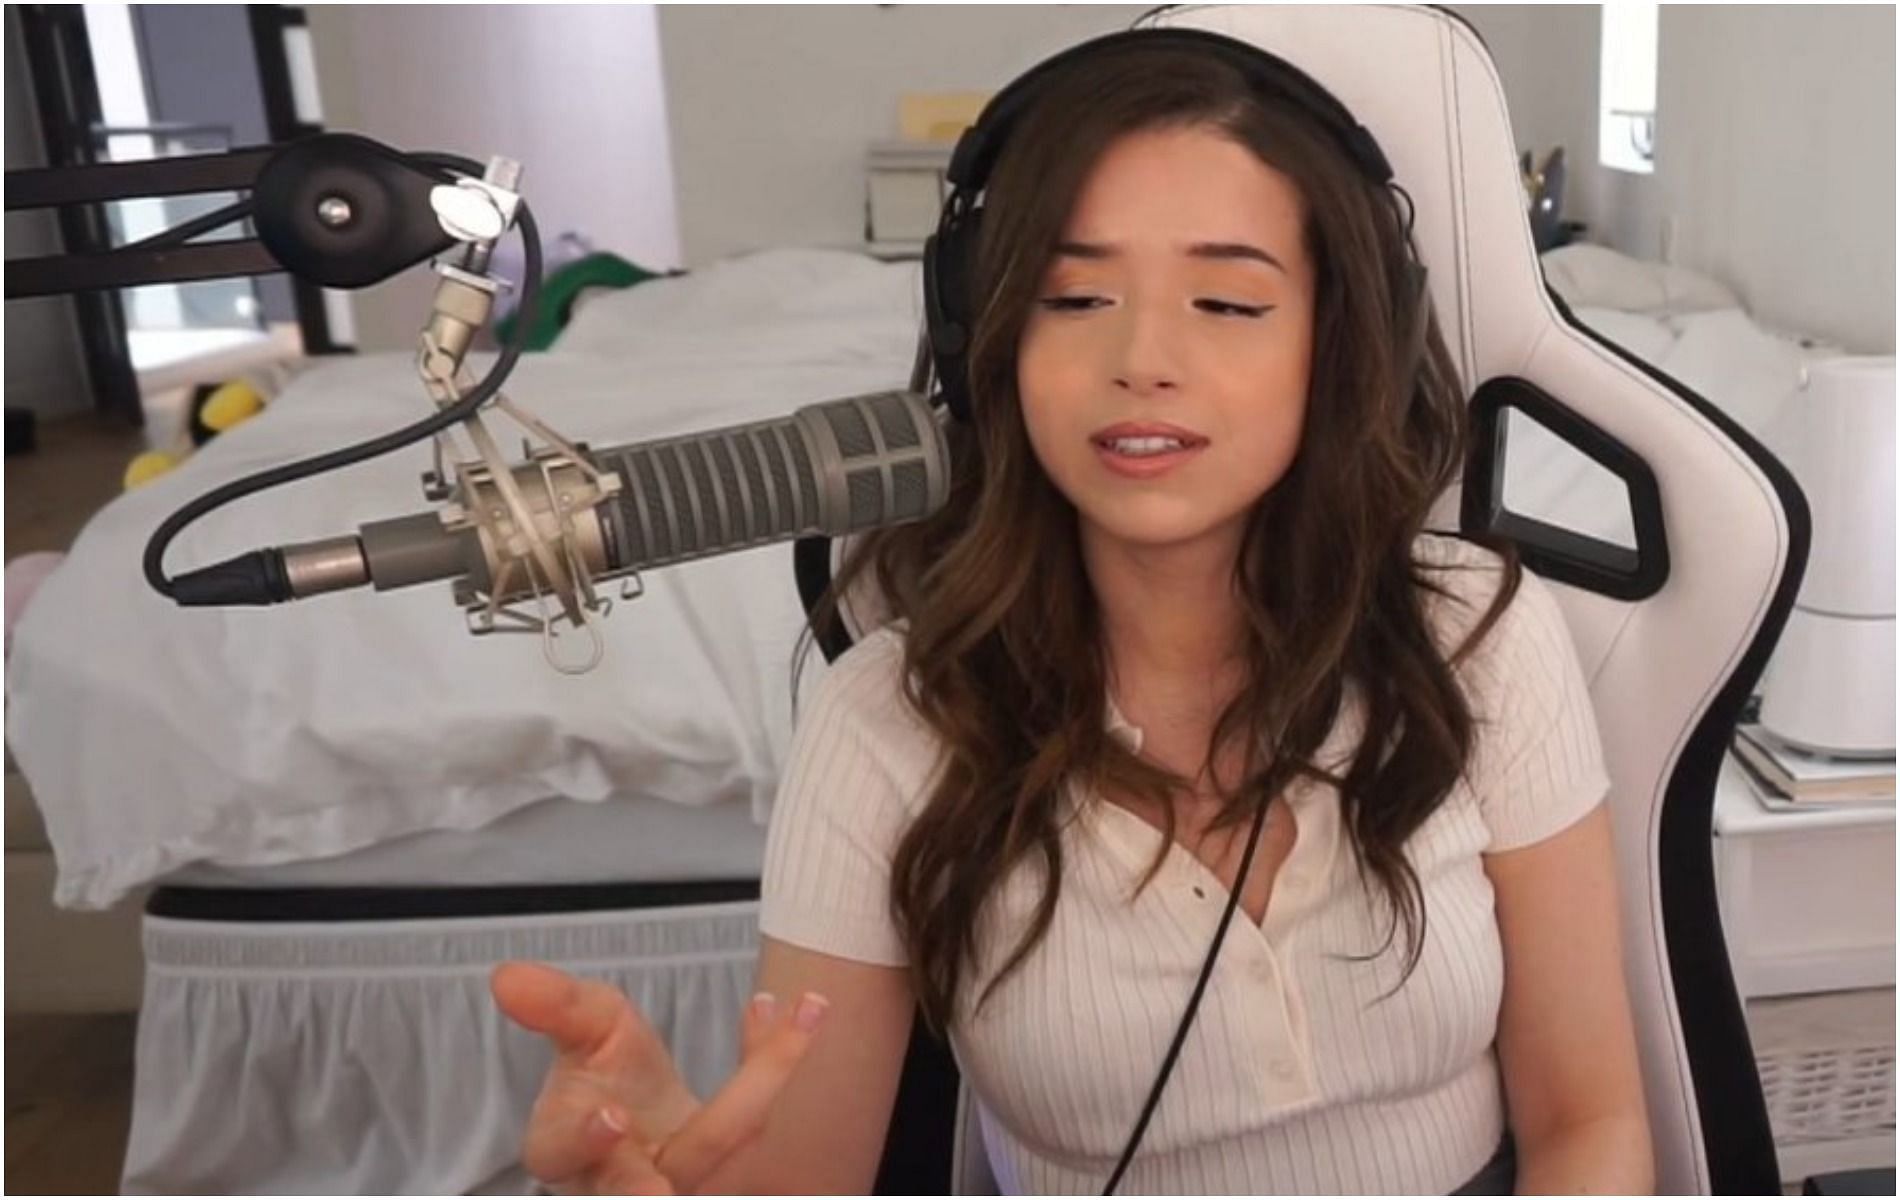 Pokimane got her channel banned on Twitch after streaming Avatar: The Last Airbender (Image via Pokimane)